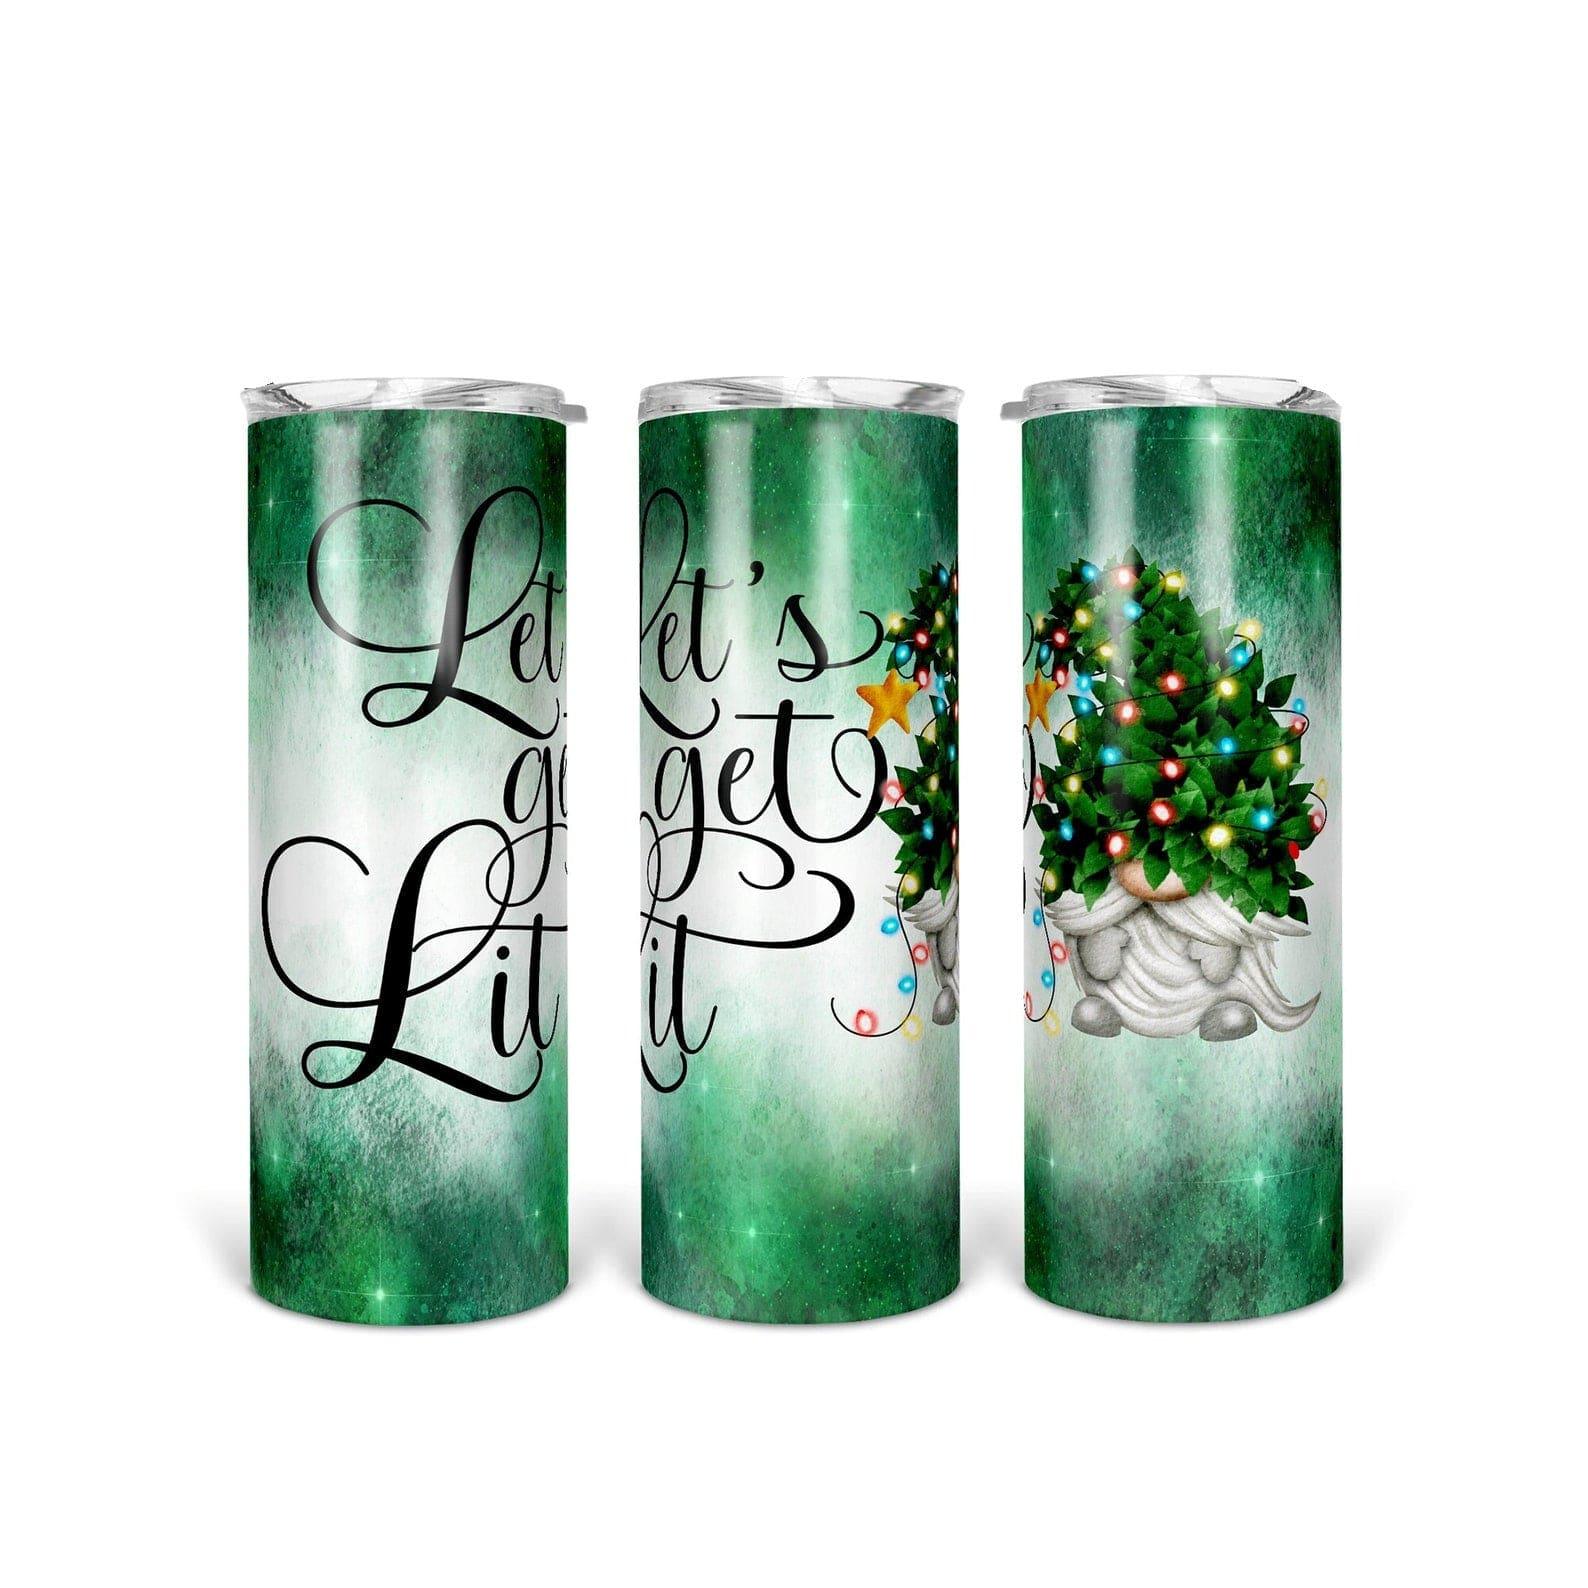 Let's Get Lit Christmas Tree 30 oz. Straight Skinny Tumbler by SSC Designs - Scrapbook Supply Companies